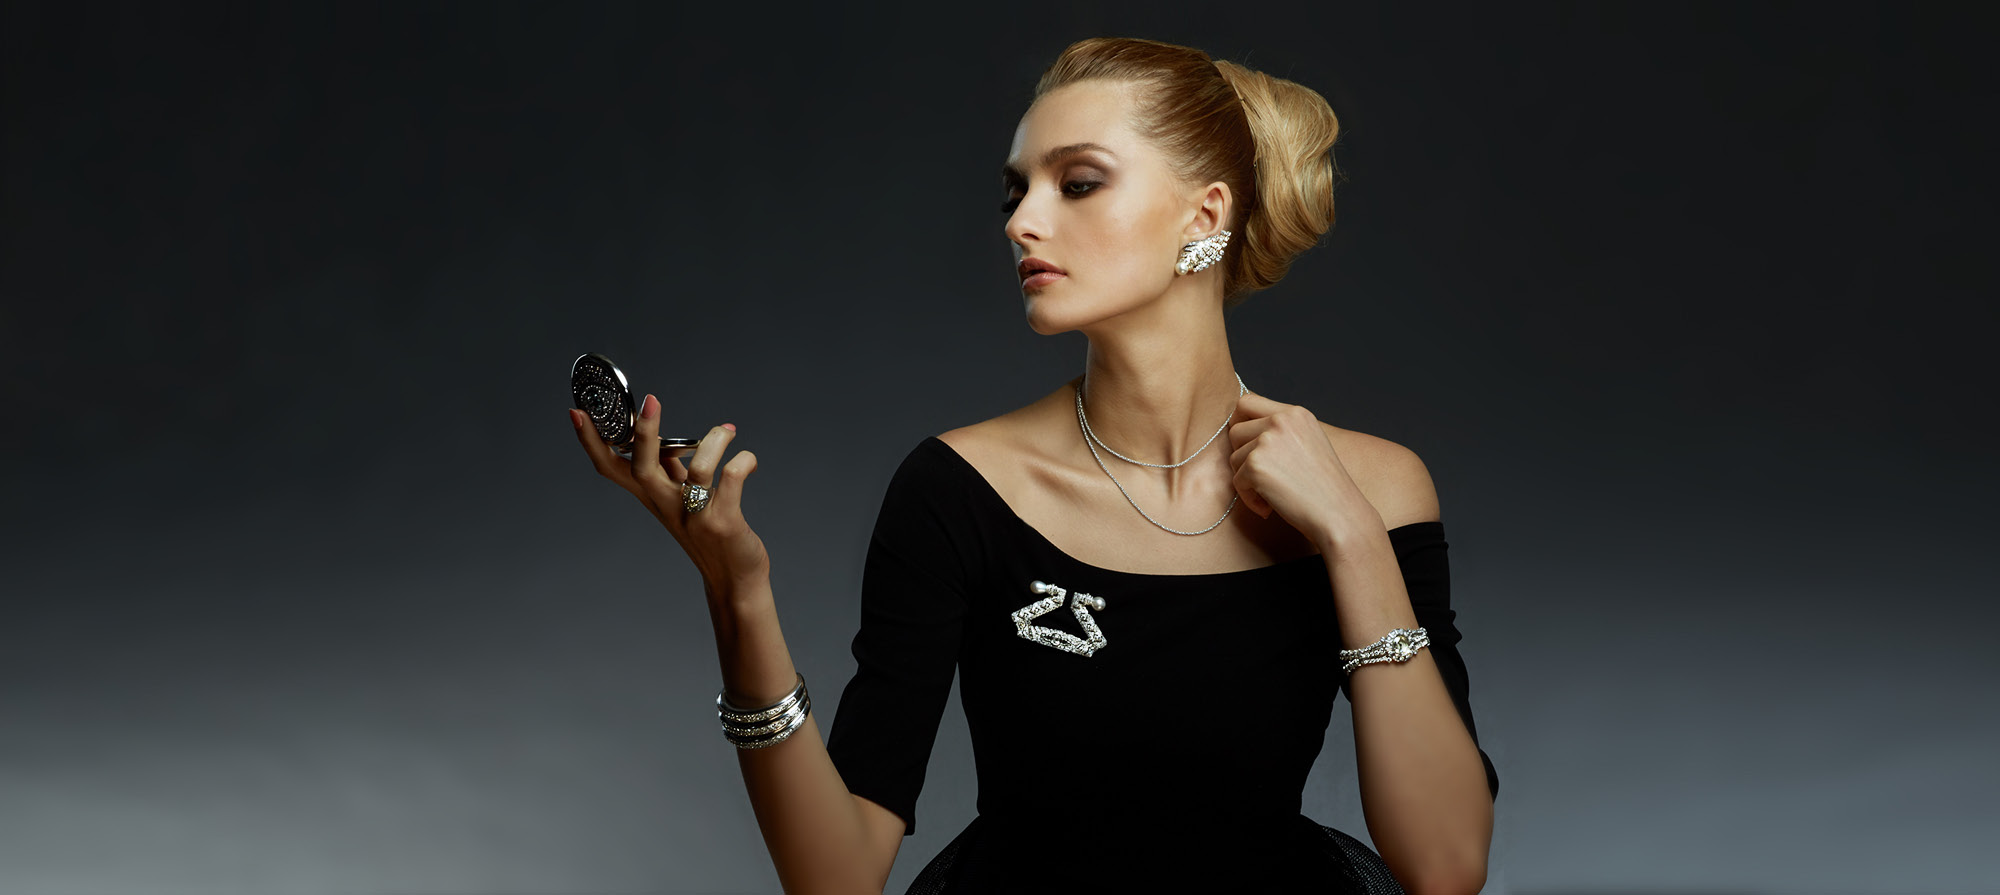 Woman wearing black dress looking at a makeup compact mirror wearing vintage antique earrings, necklace, broach, bracelets and rings dark gray black background